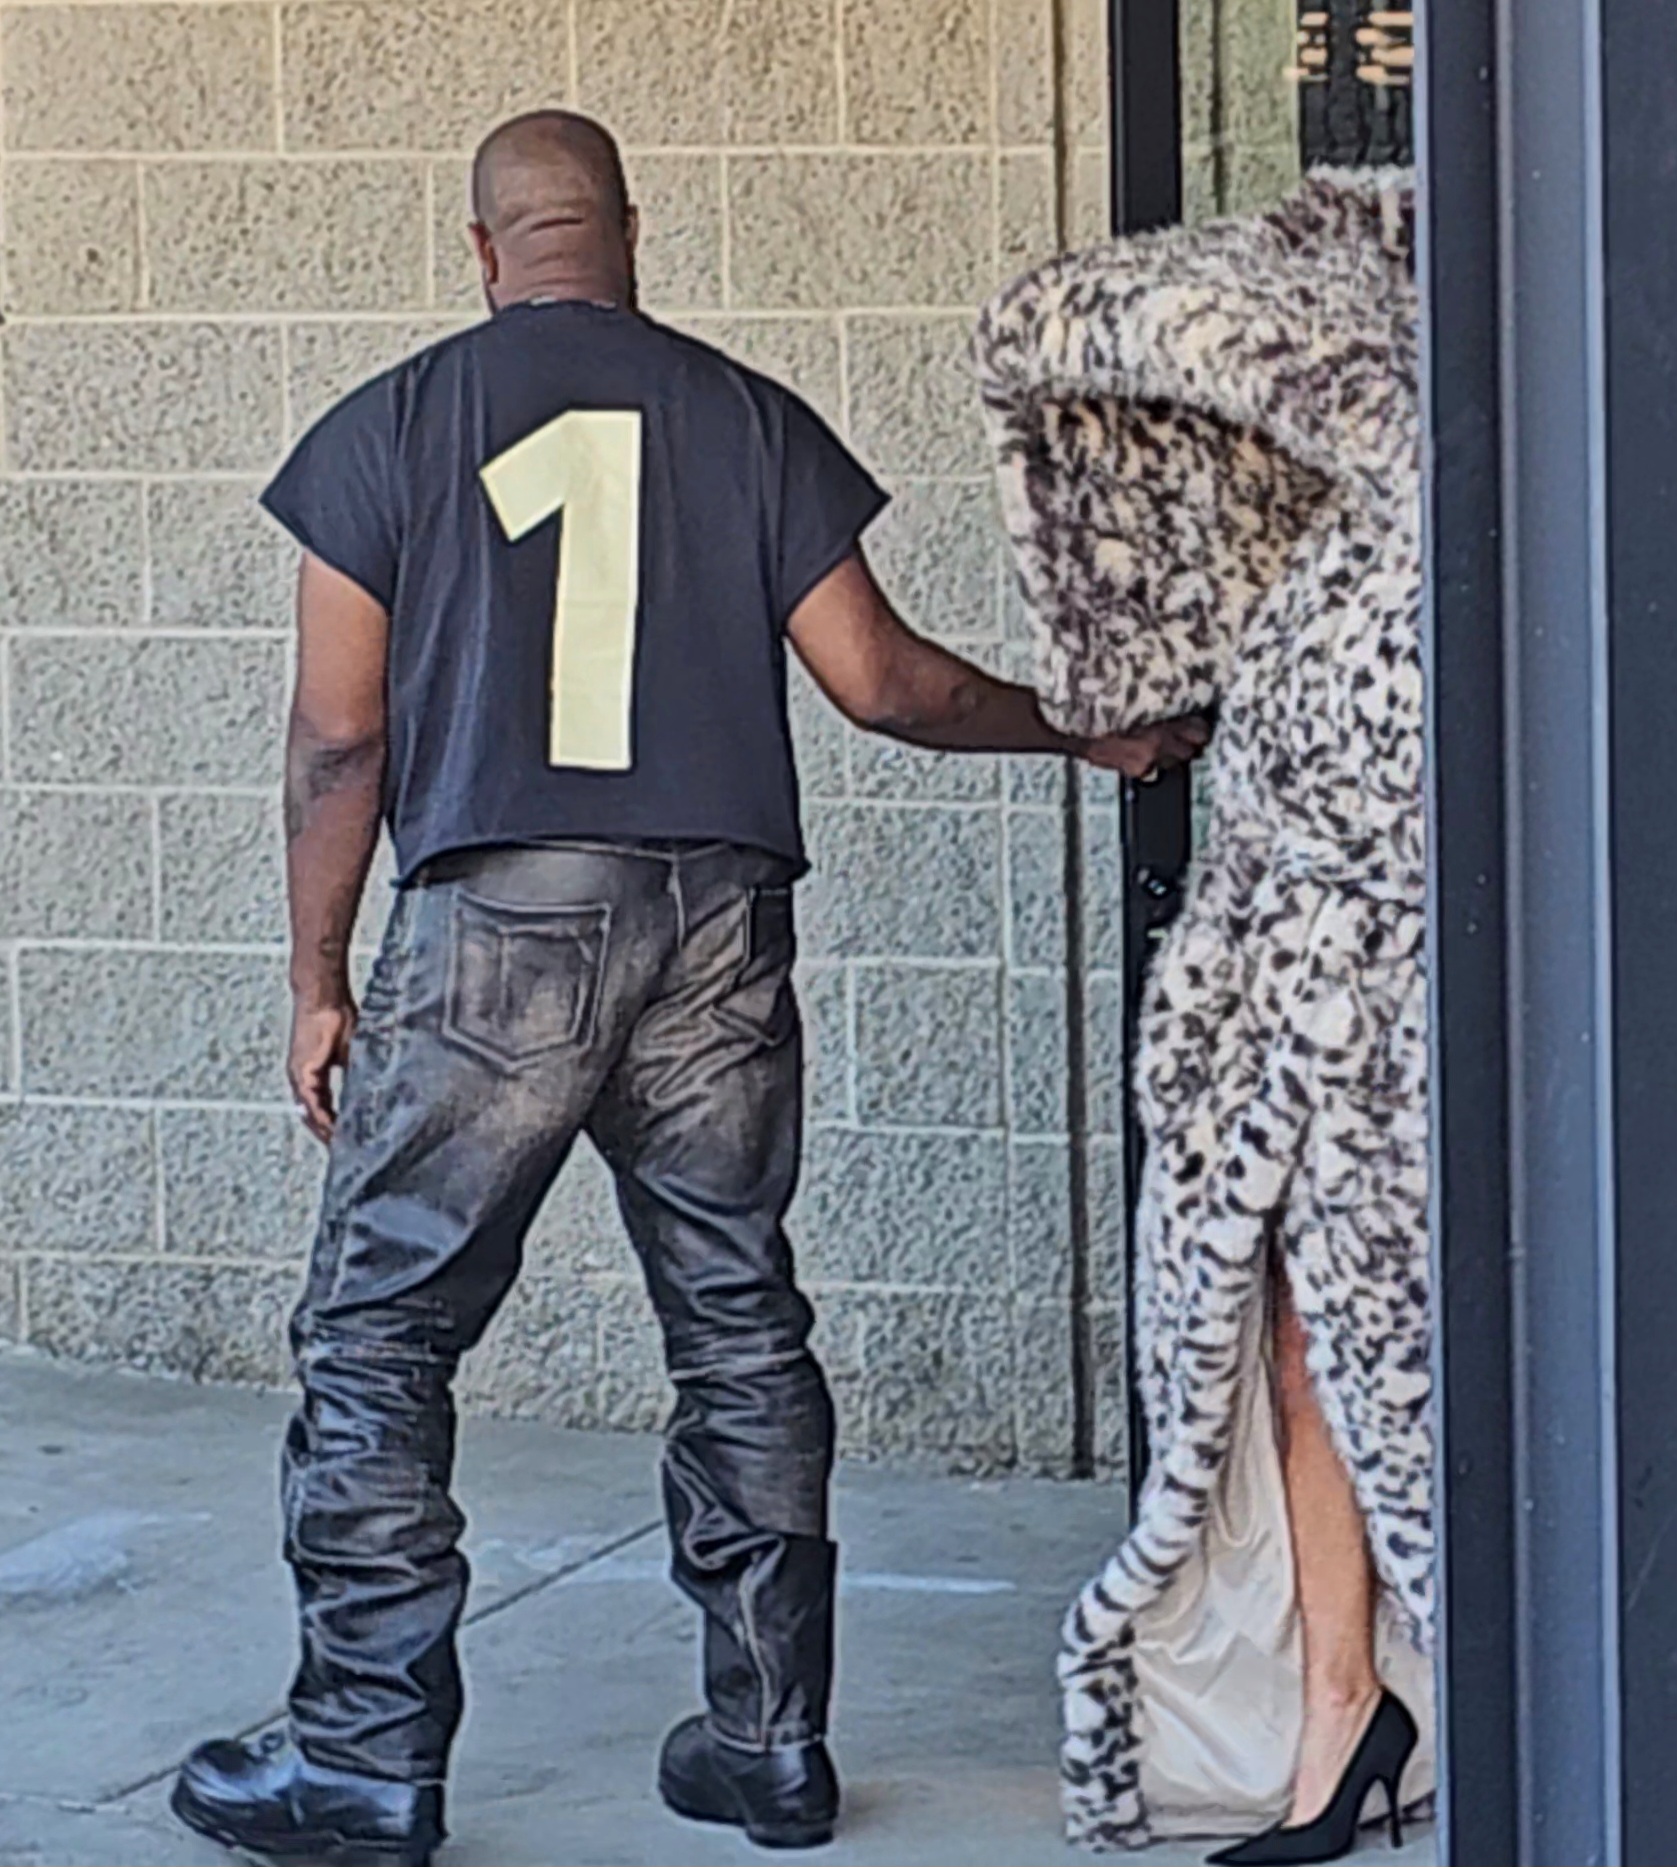 Kanye's outfit choice was more subtle, opting for a black tee and pants